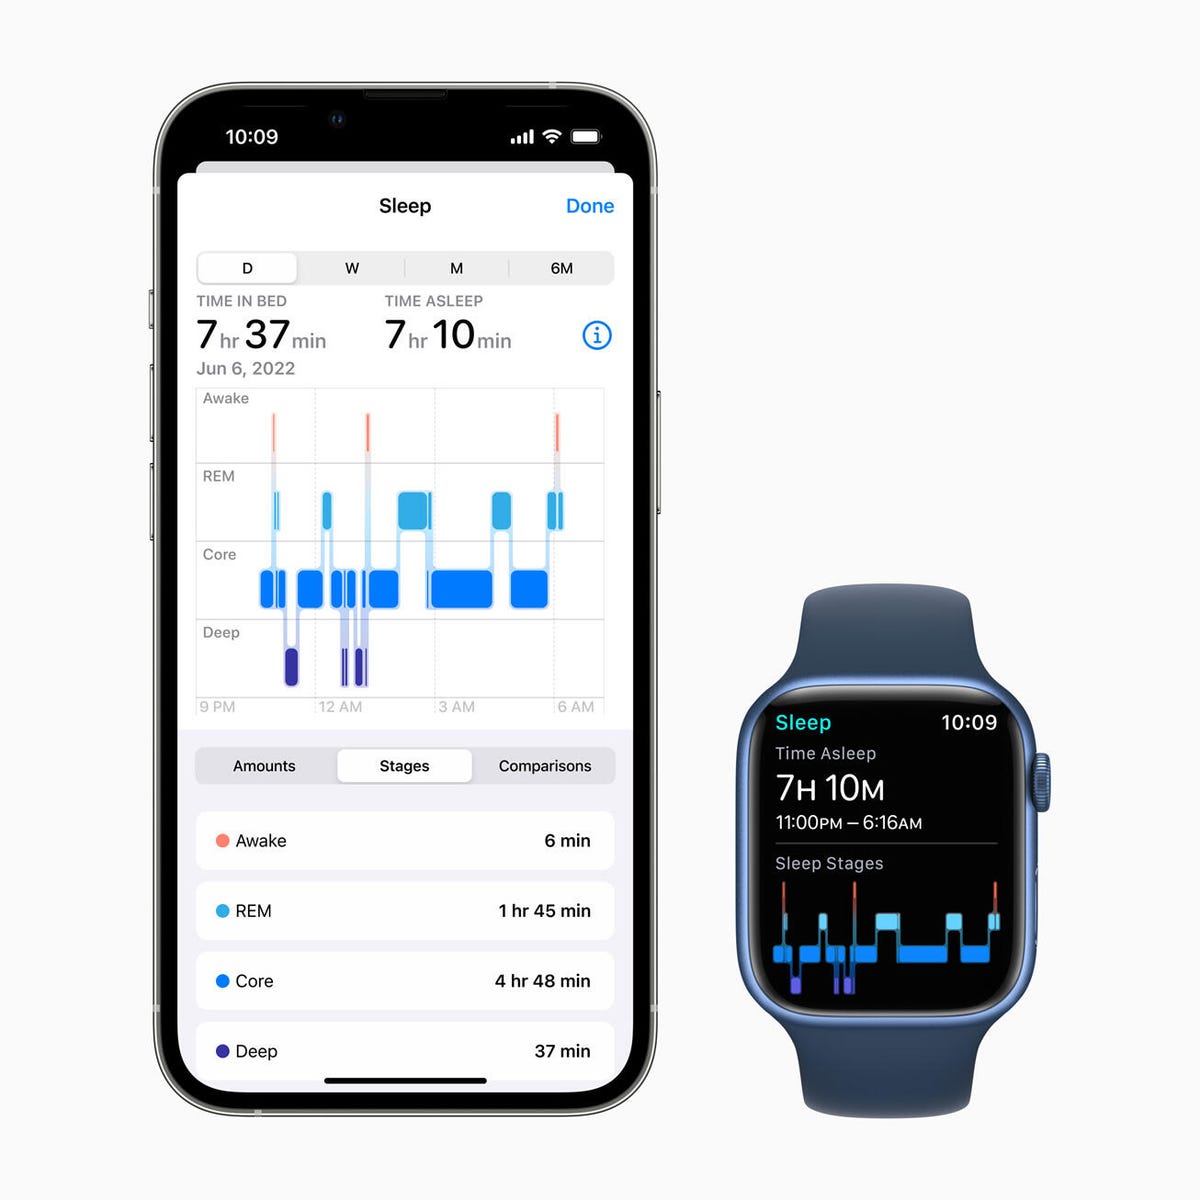 Sleep tracking on the iPhone and Apple Watch